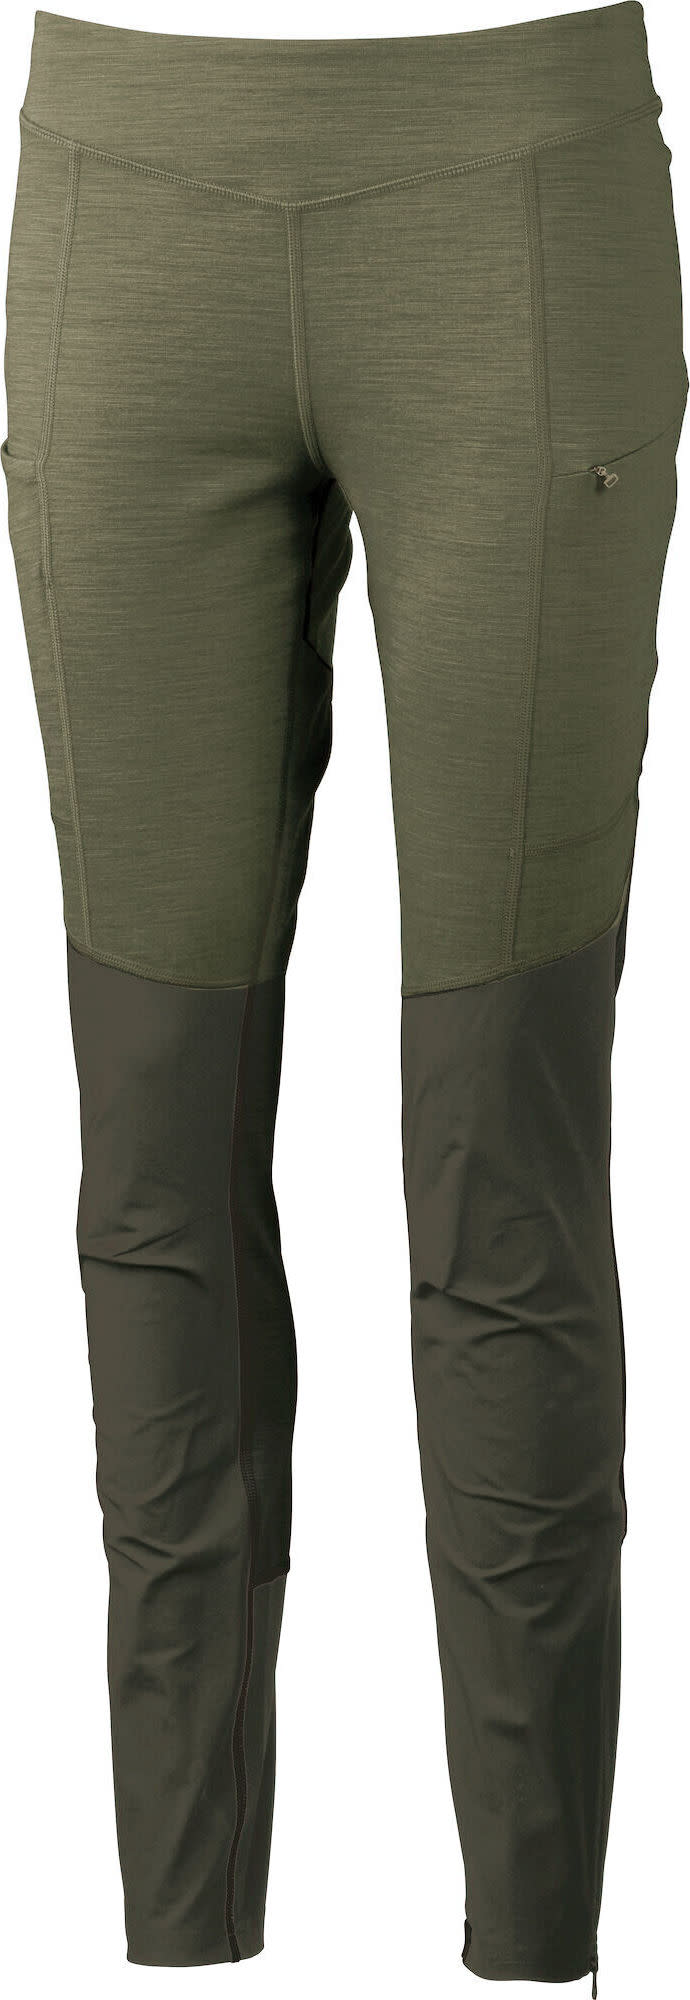 Lundhags Women’s Tausa Tight Clover/Forest Green